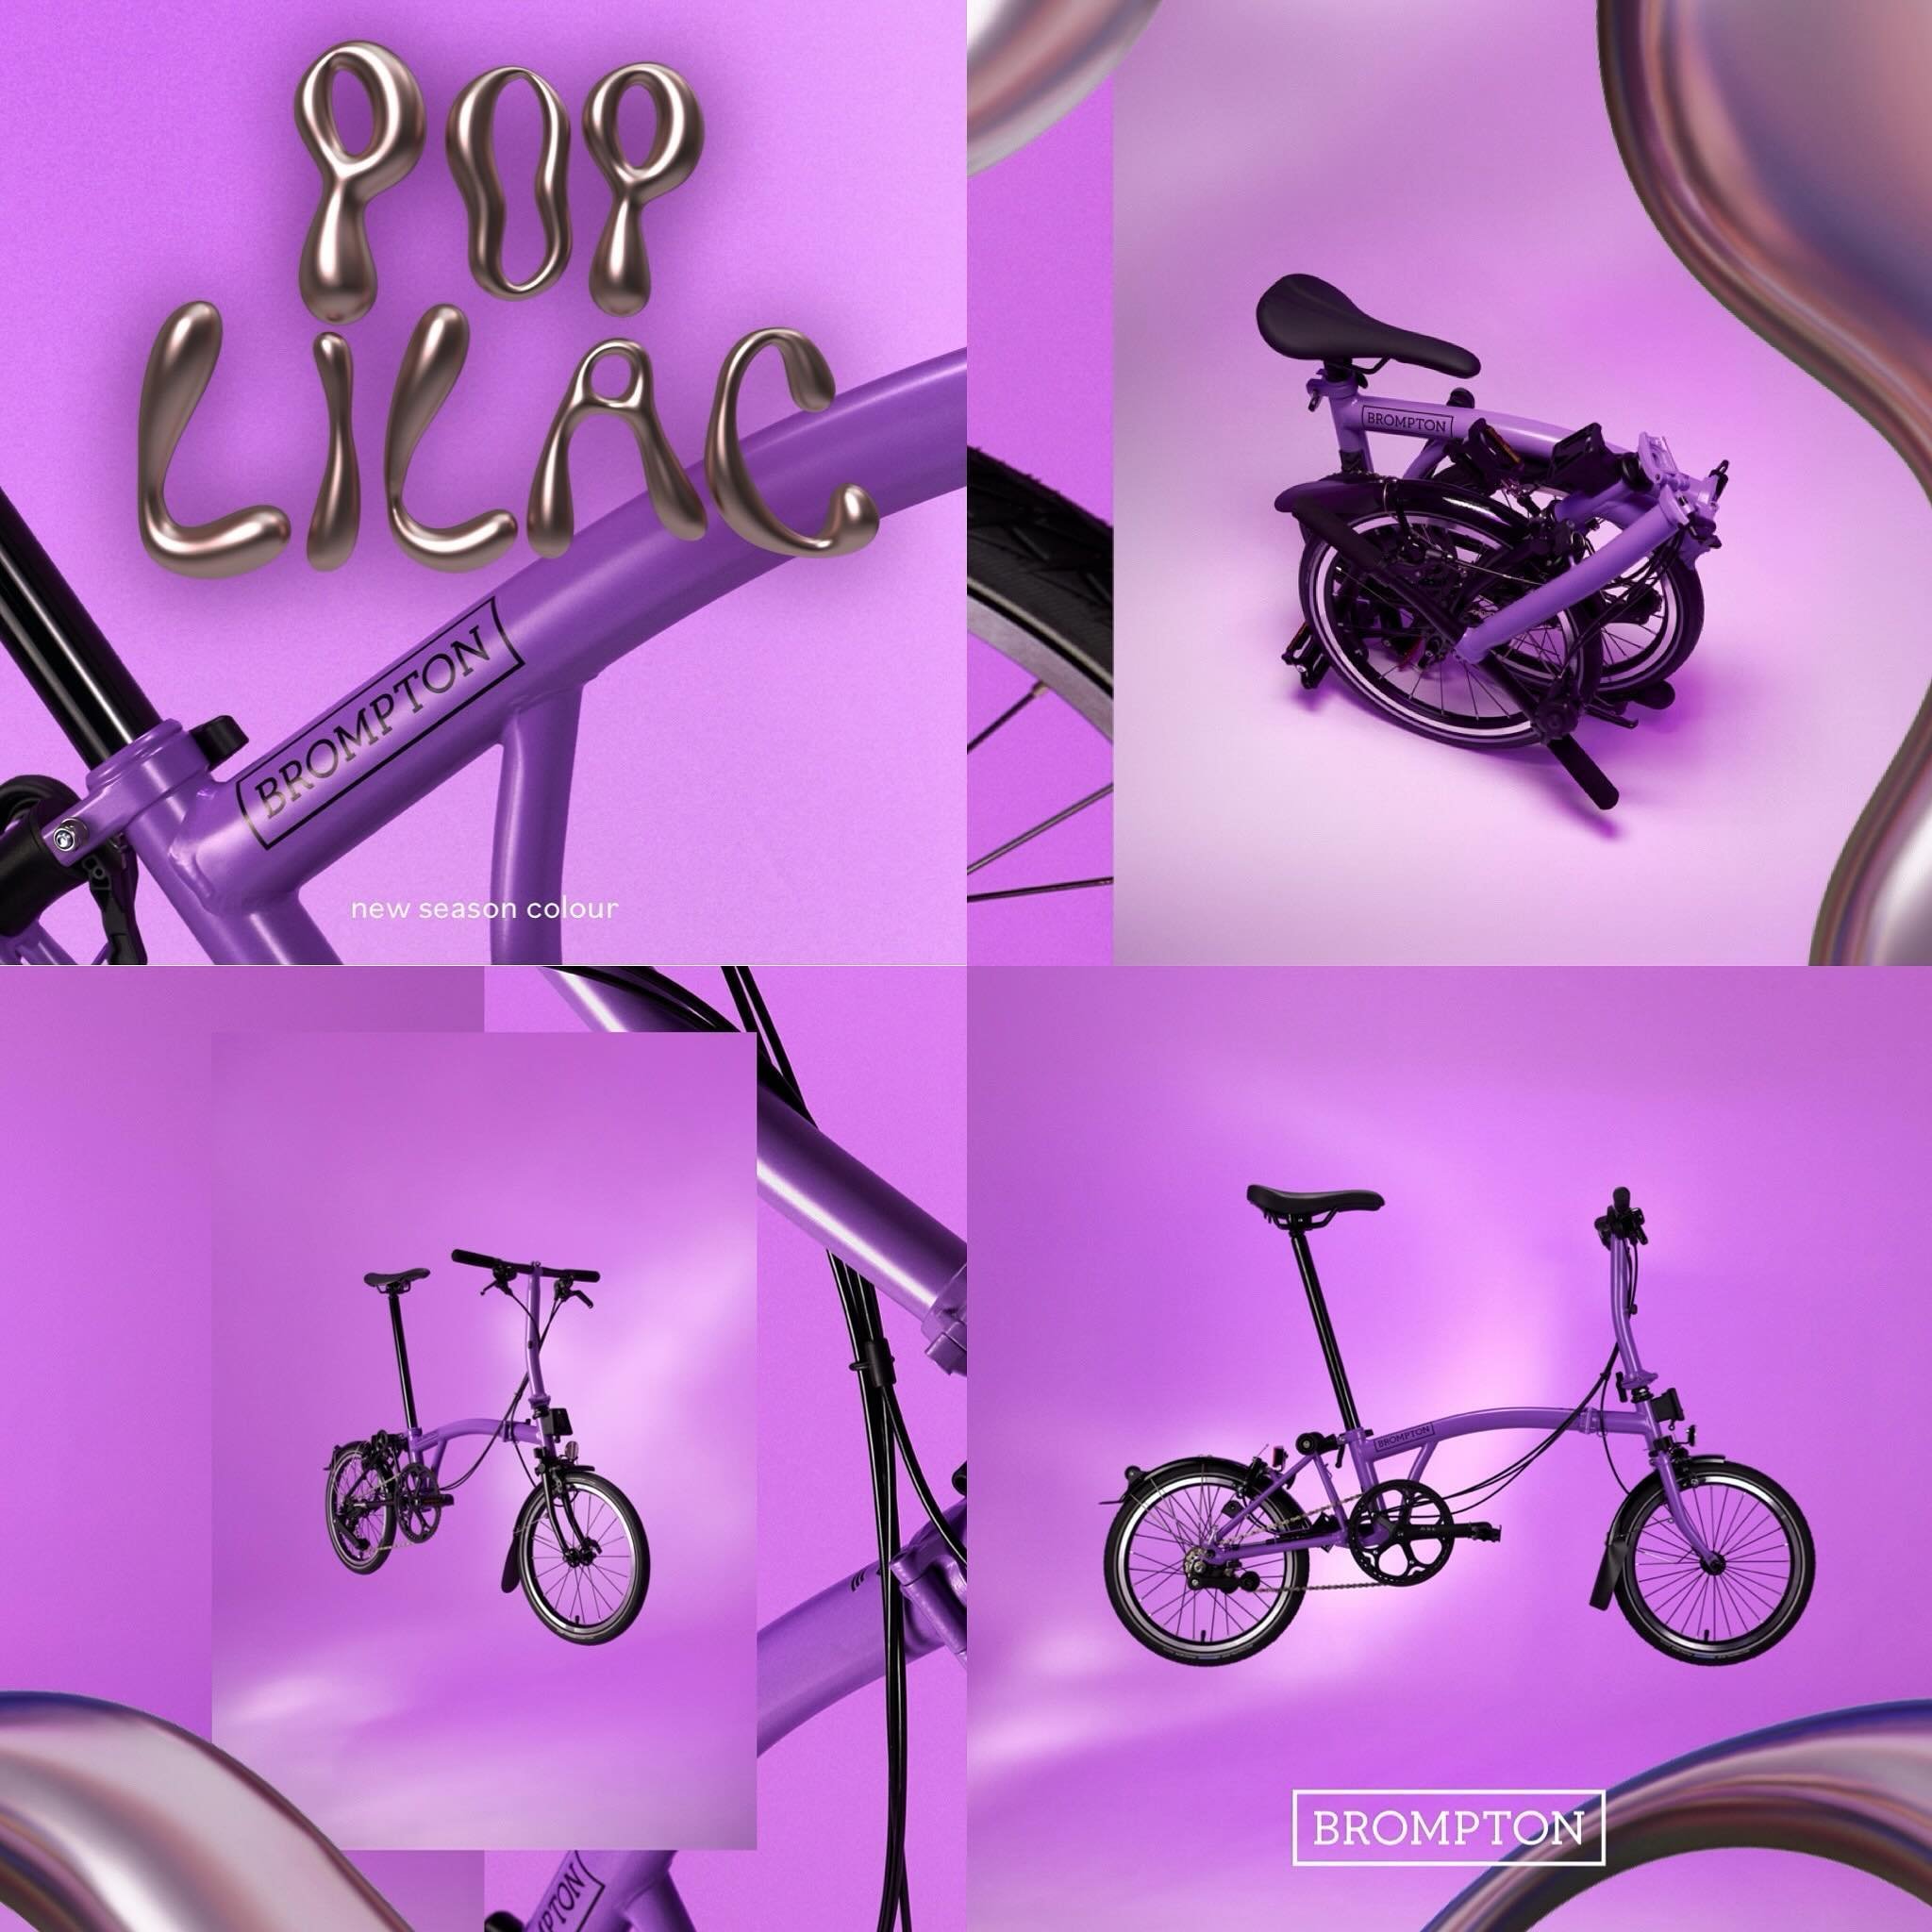 P O P  L I L A C
New Season Colour 

Landing Soon 
Available in C Line Explore / P Line Urban 
Limited Numbers available 

Check in with your local dealers for more info 

#brompton #bromptonbicycle #bromptoncommunity #foldingbike 
#bromptonaustralia